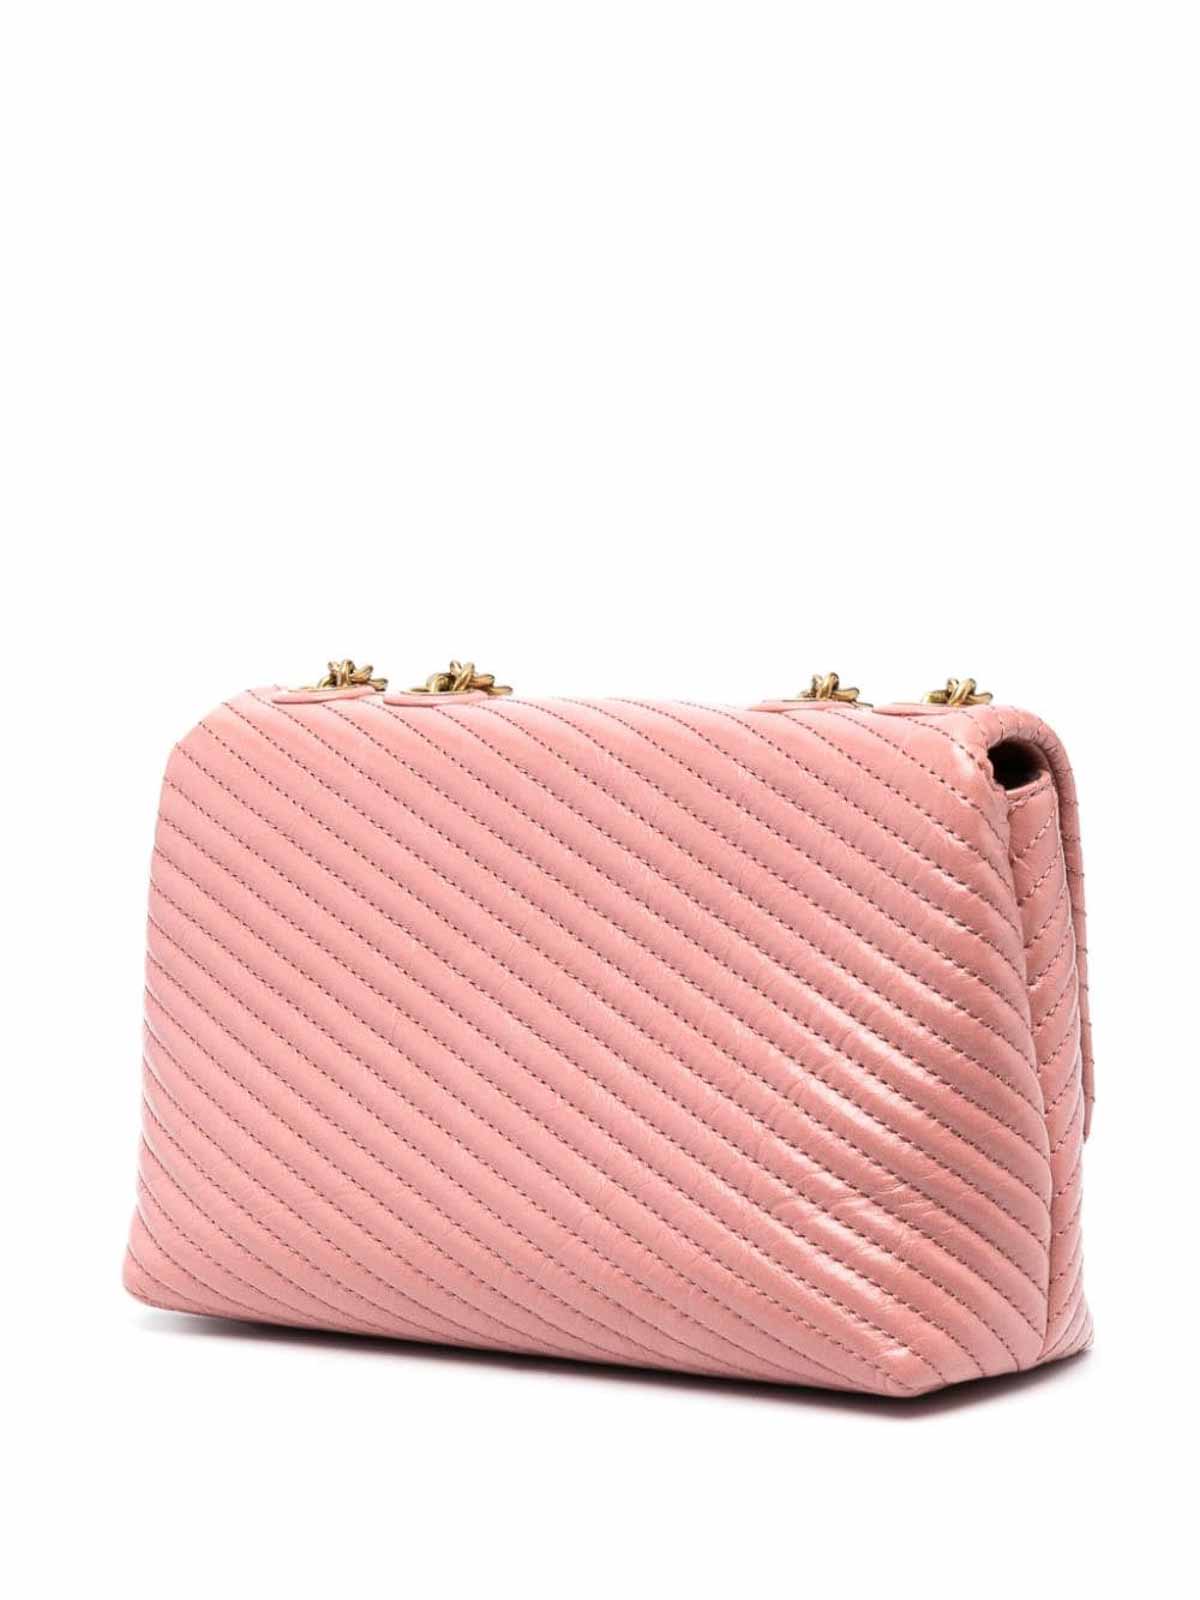 Tory Burch Pink Quilted Leather Flap Crossbody Bag Tory Burch